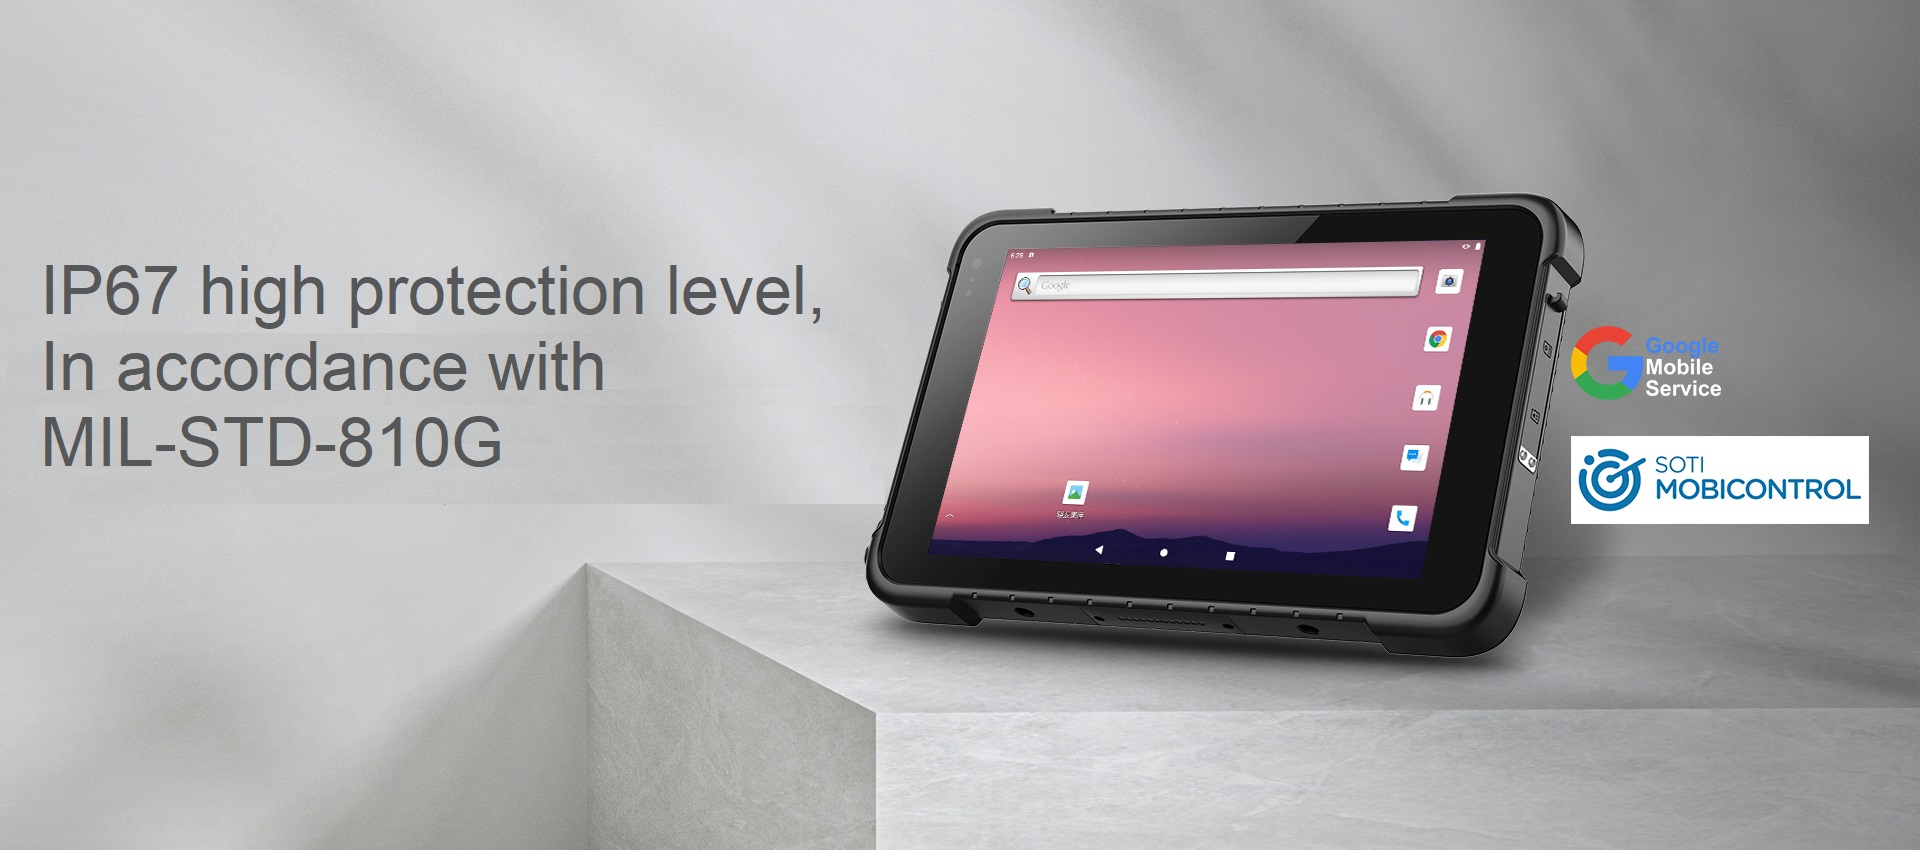 8 inch Android IP67 rugged tablet data (1)